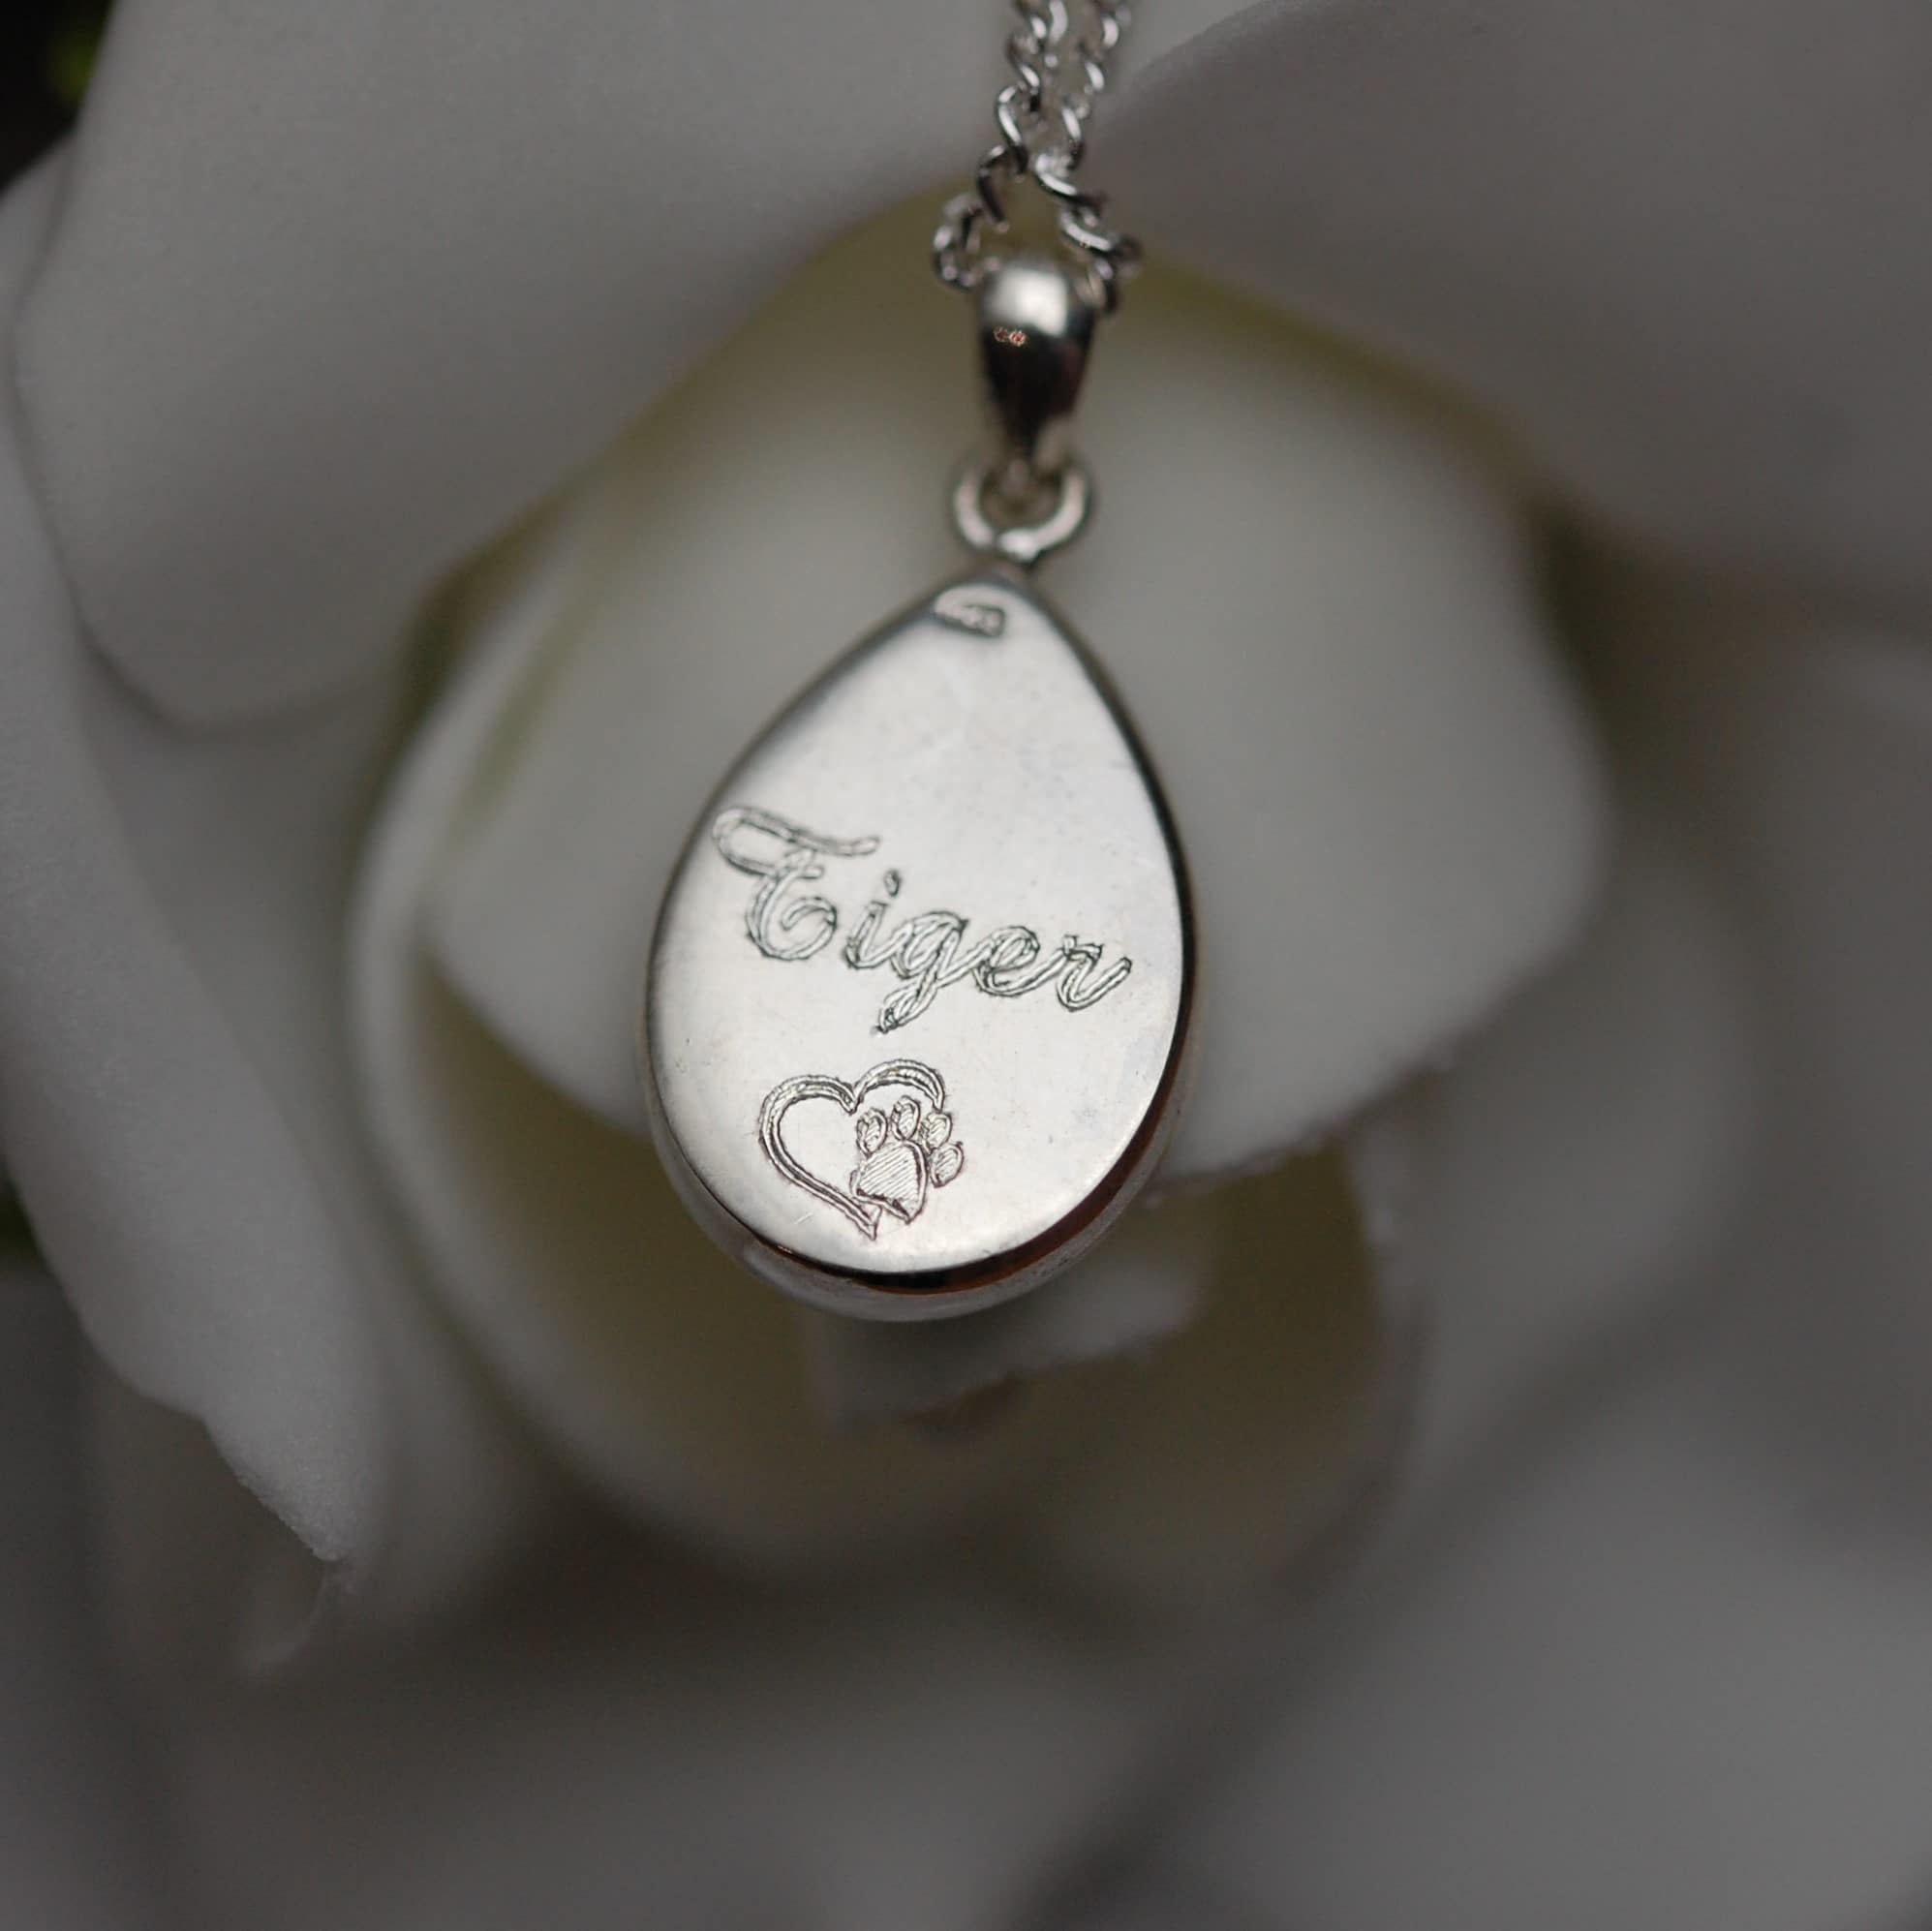 Pet name inscribed on the back of a silver tear drop pendant with pet fur or cremation ashes